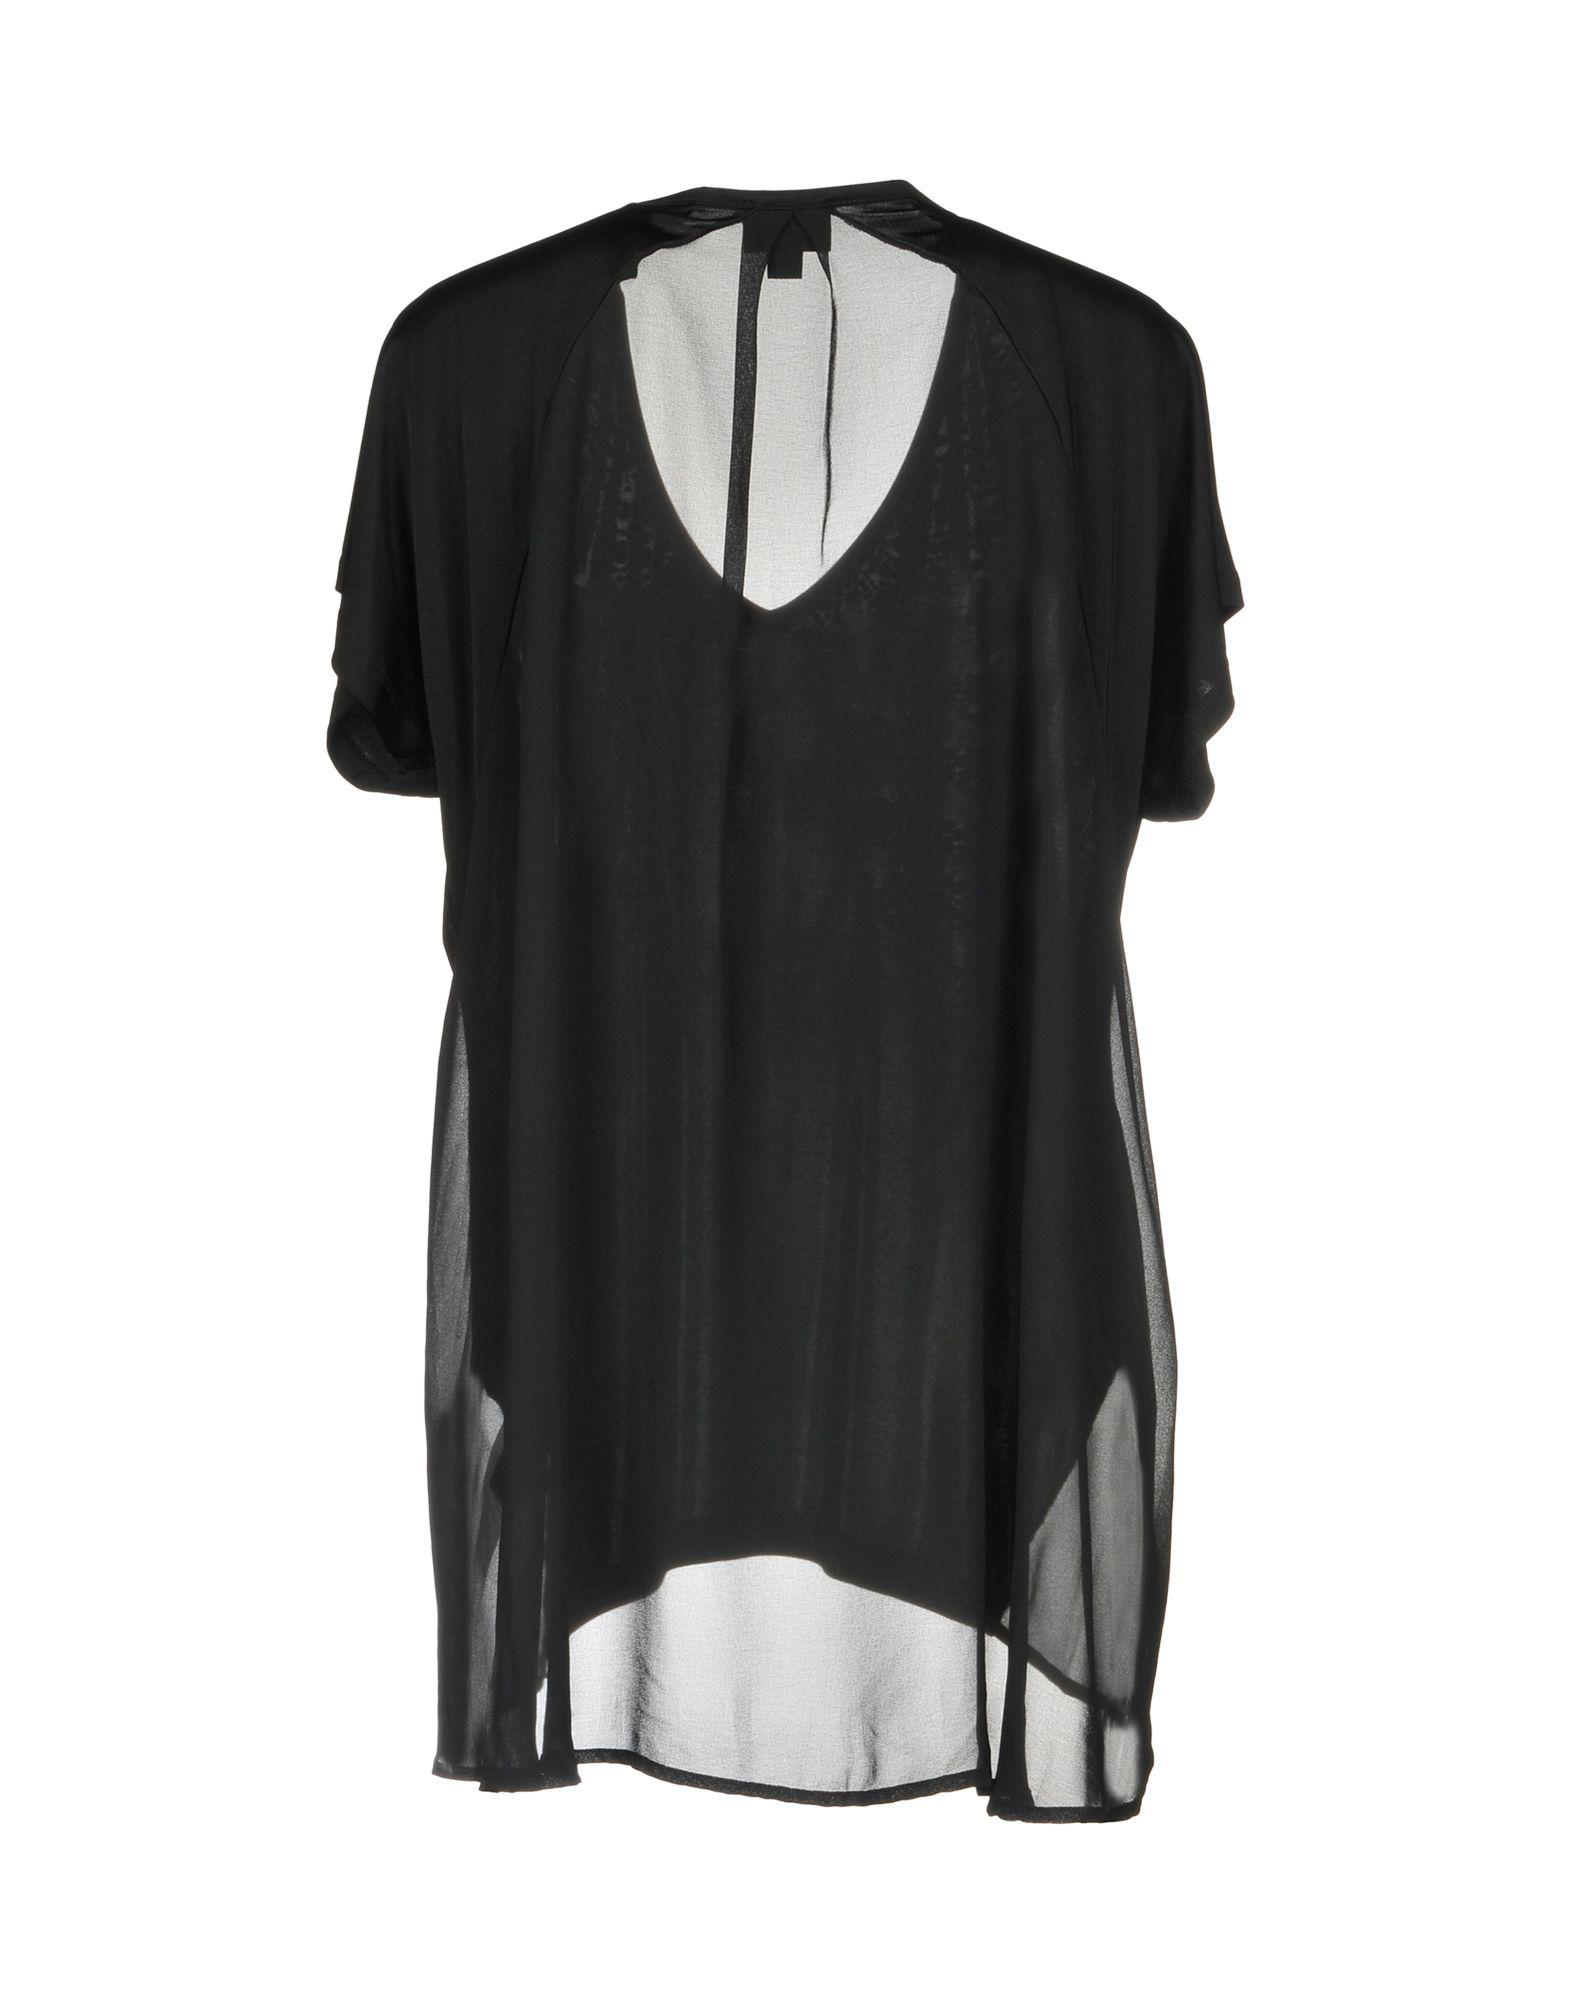 Just Cavalli Synthetic Blouse in Black - Lyst